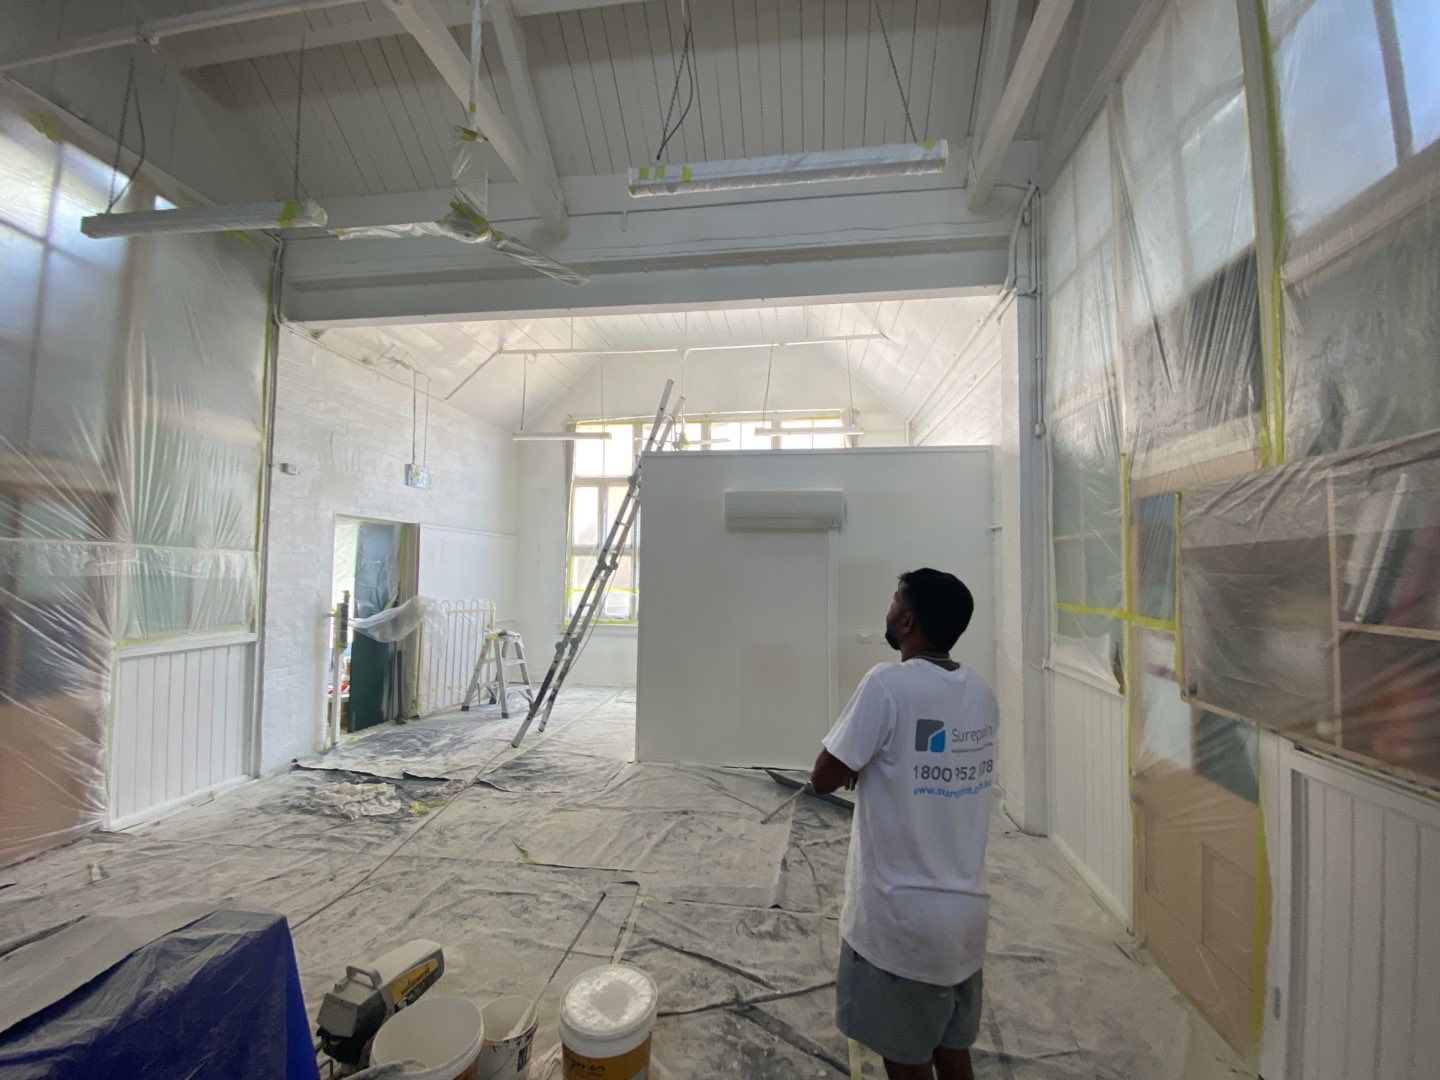 Surepaint Interior Painting Services Brisbane- Prepping a ceiling for interior painting